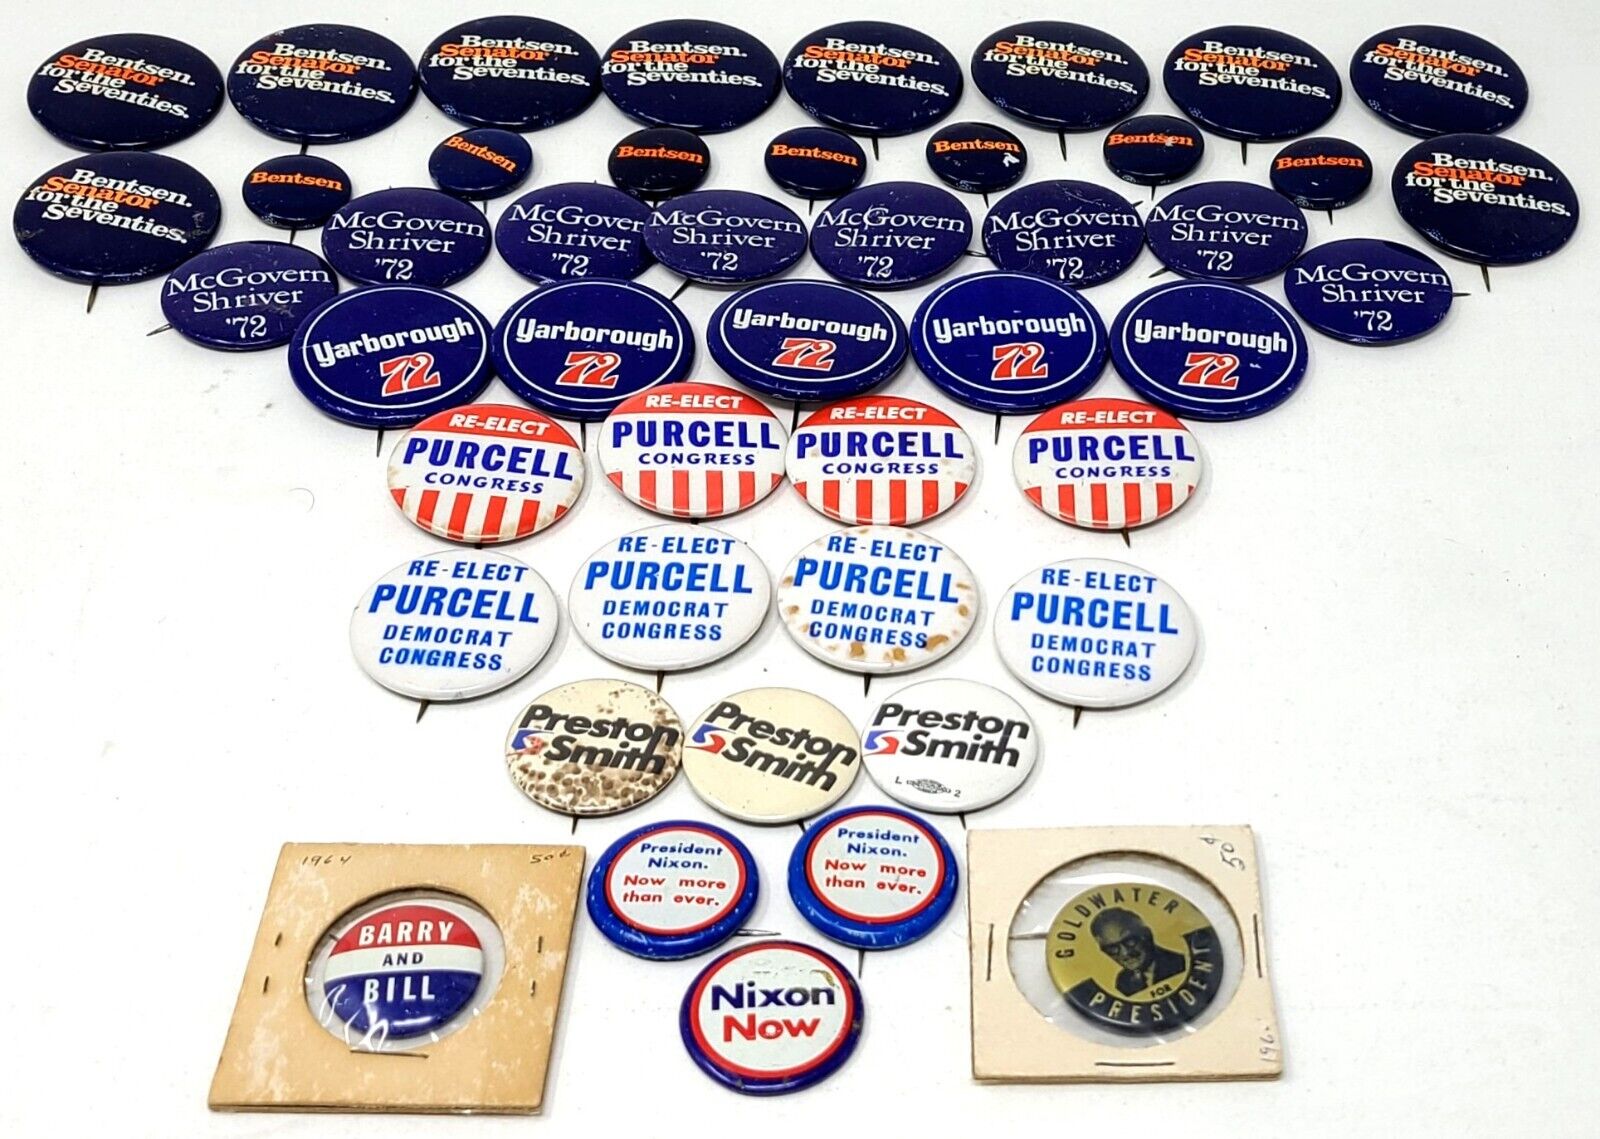 Lot of 46 Political Pins & Campagn Buttons Nixon, McGovern, Bentson, Purcell